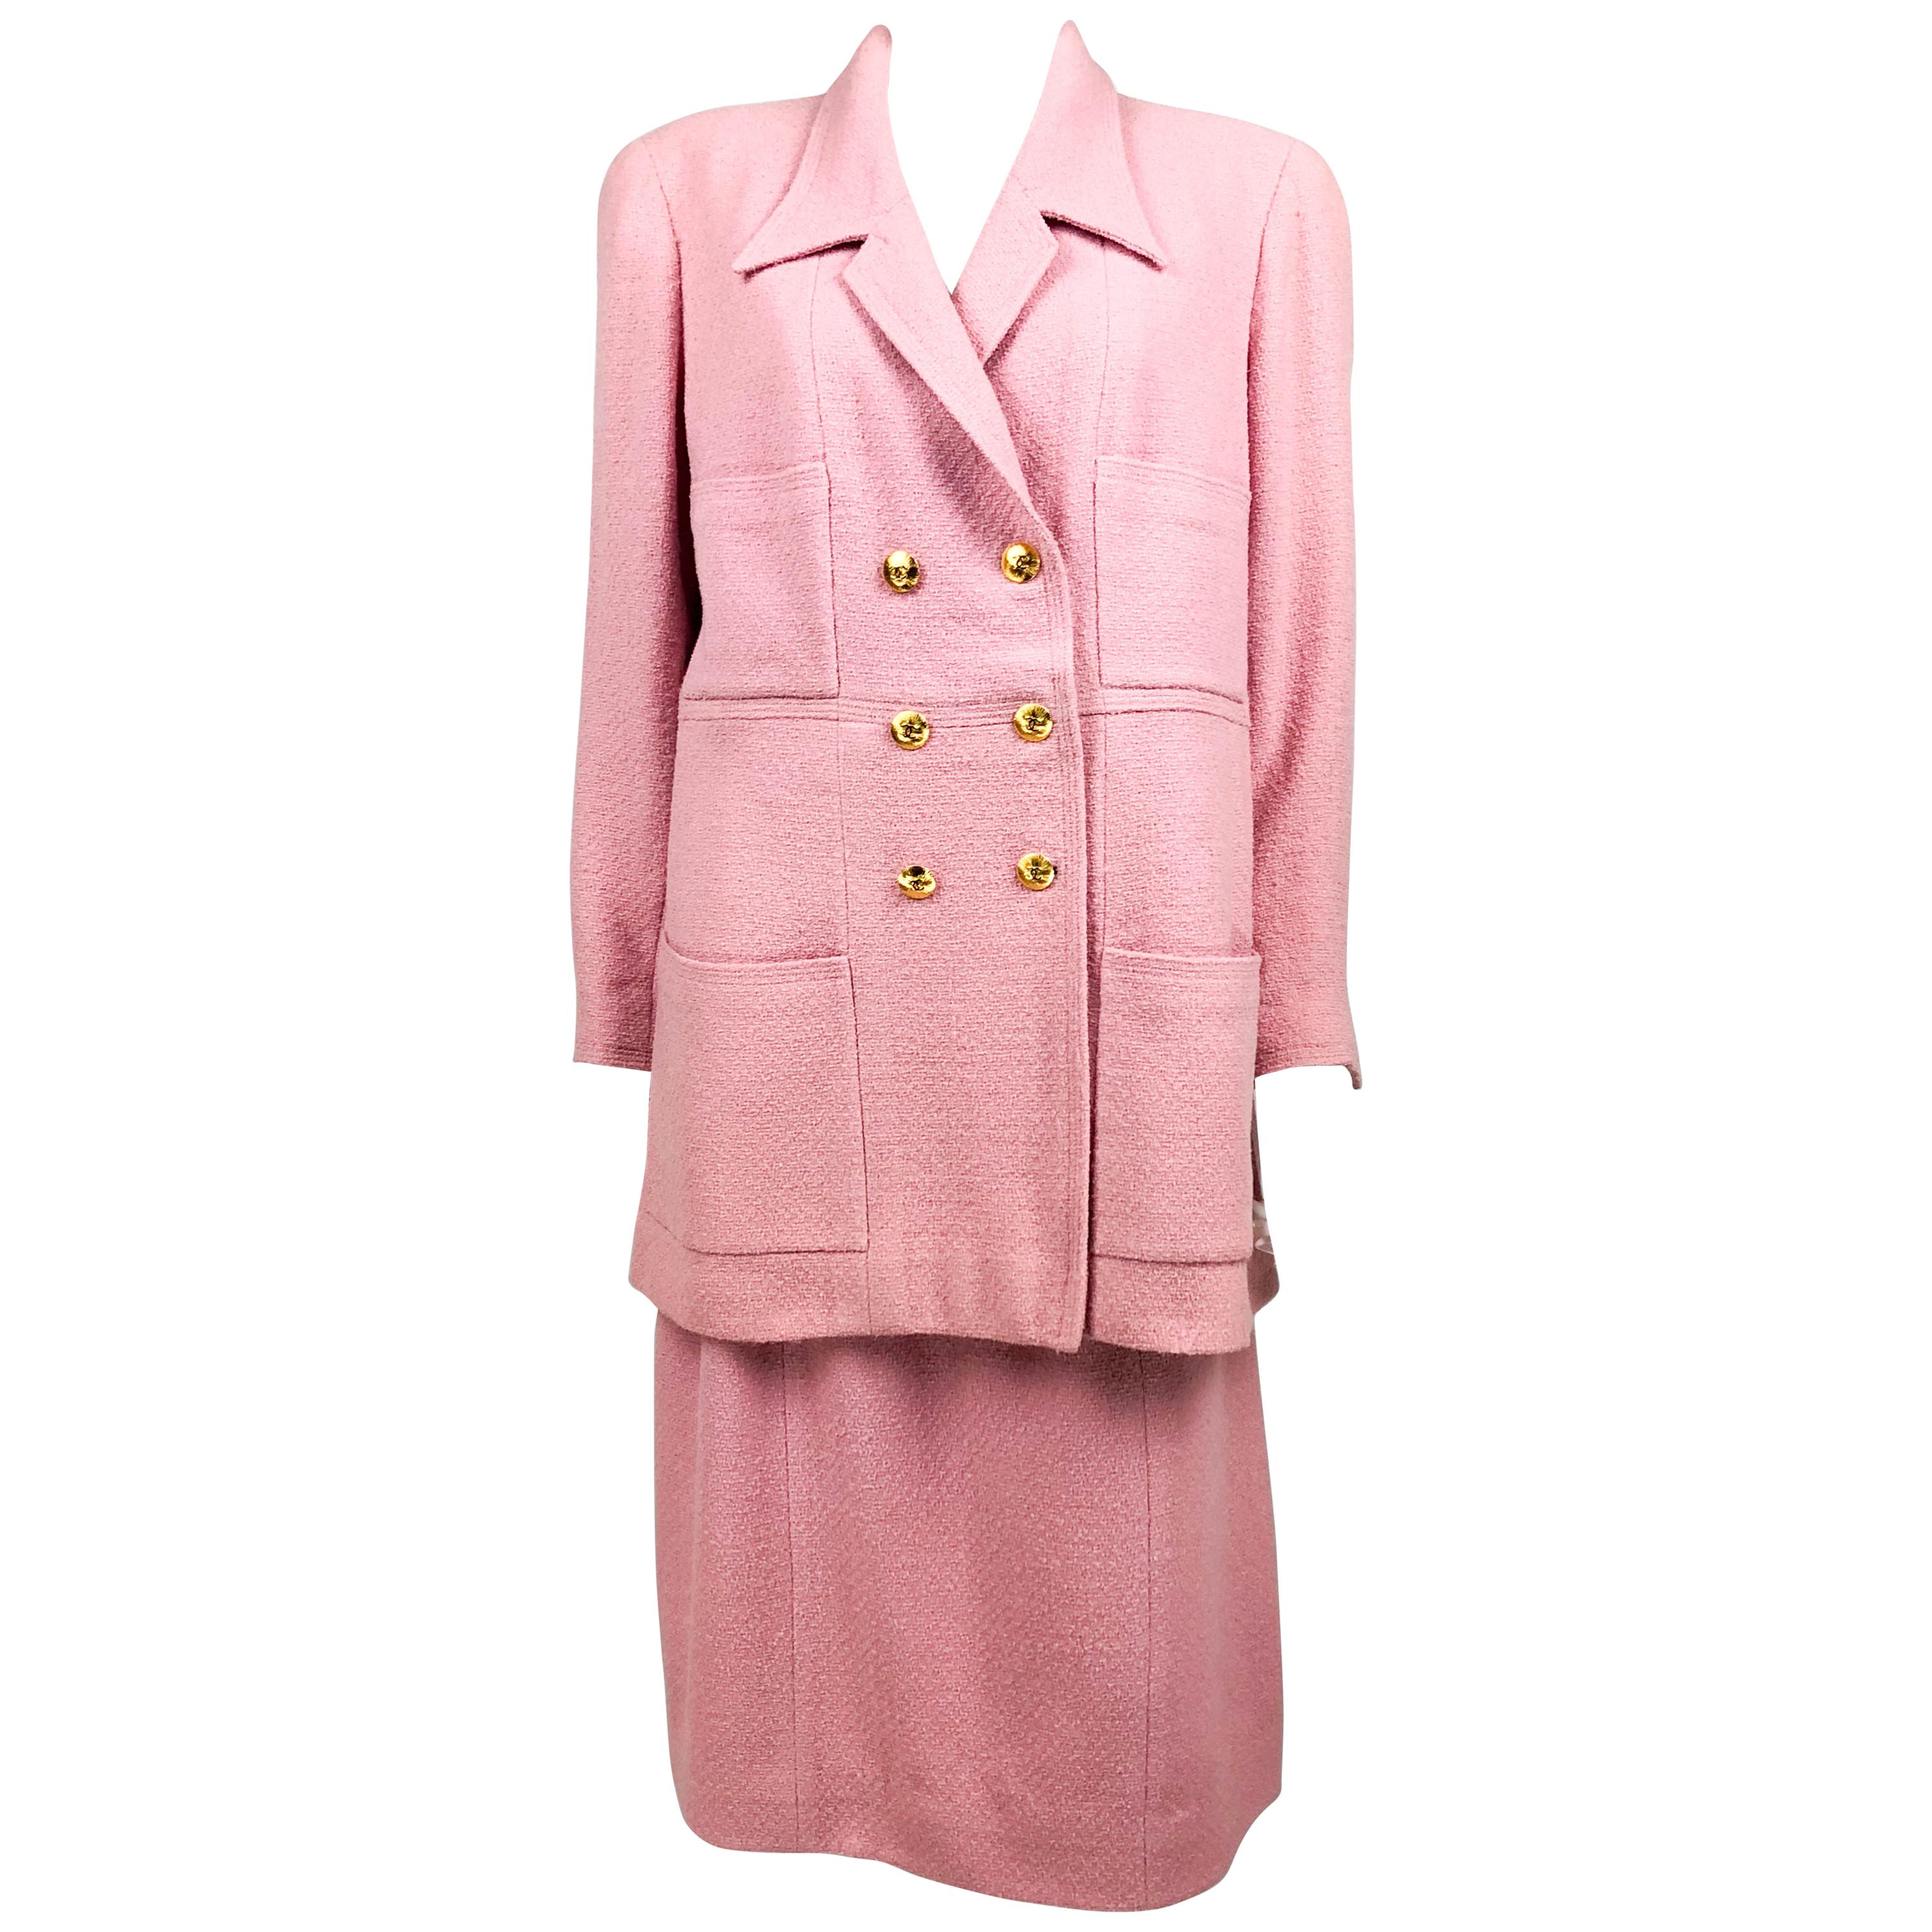 1996 Chanel Pink Wool Skirt Suit With Gilt Logo Buttons (Large Size) For Sale